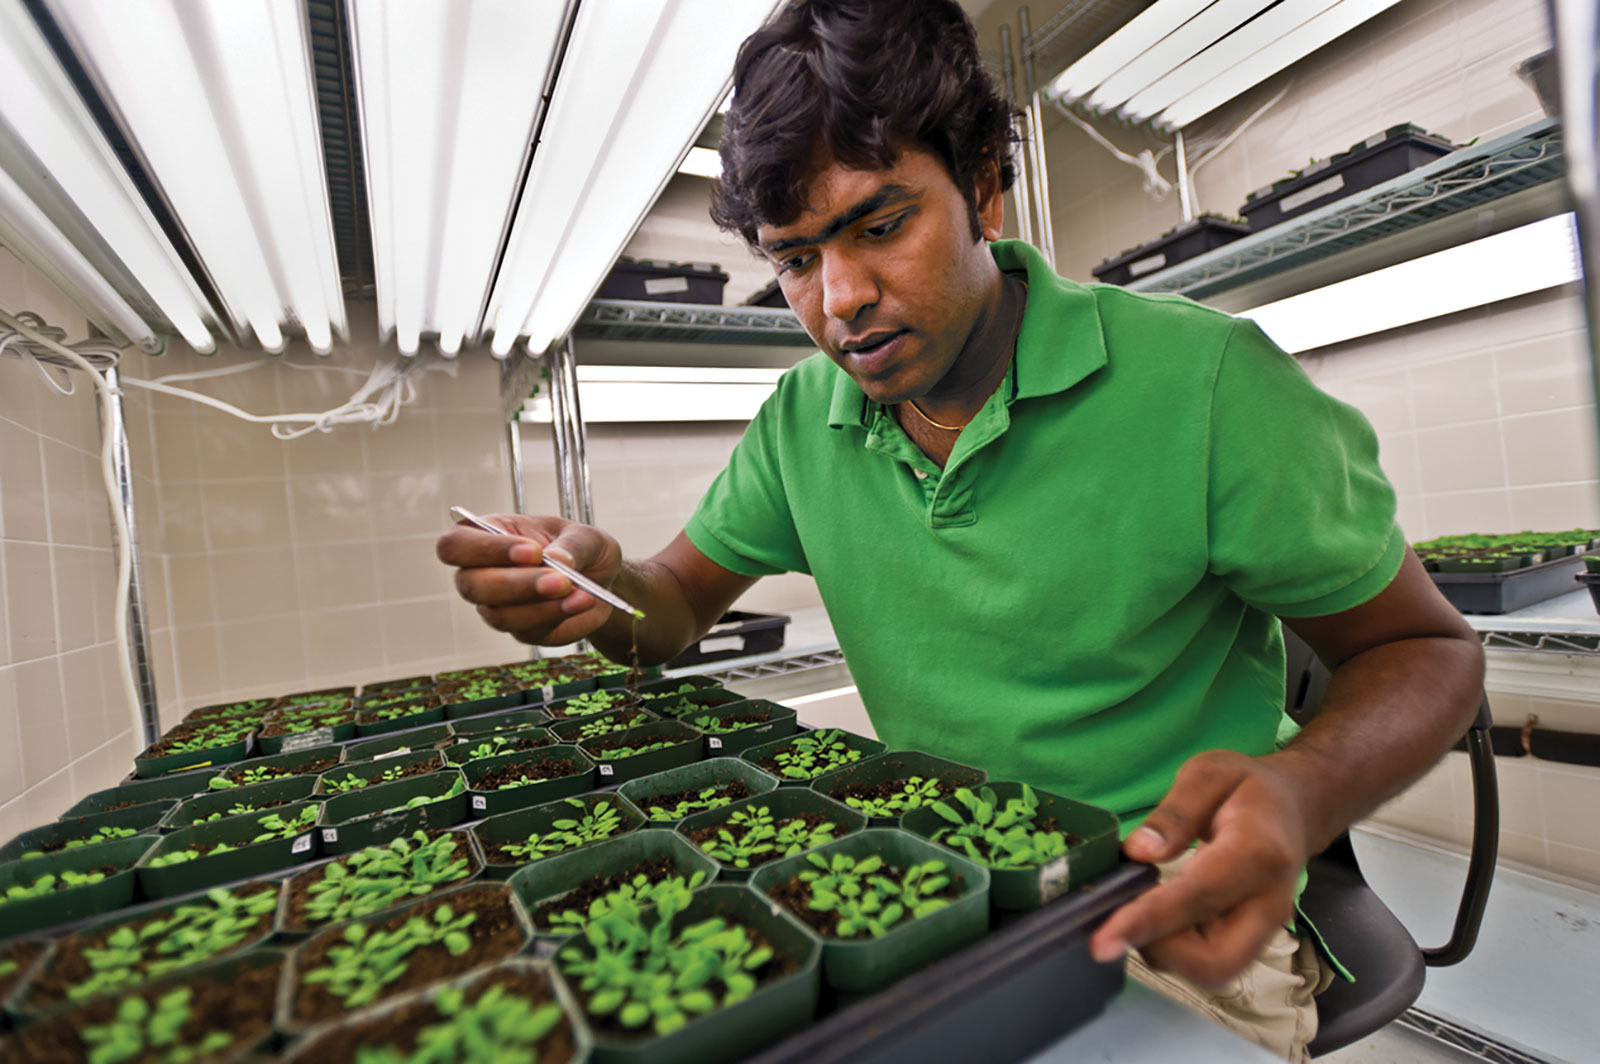 Researcher working with small plants in lab